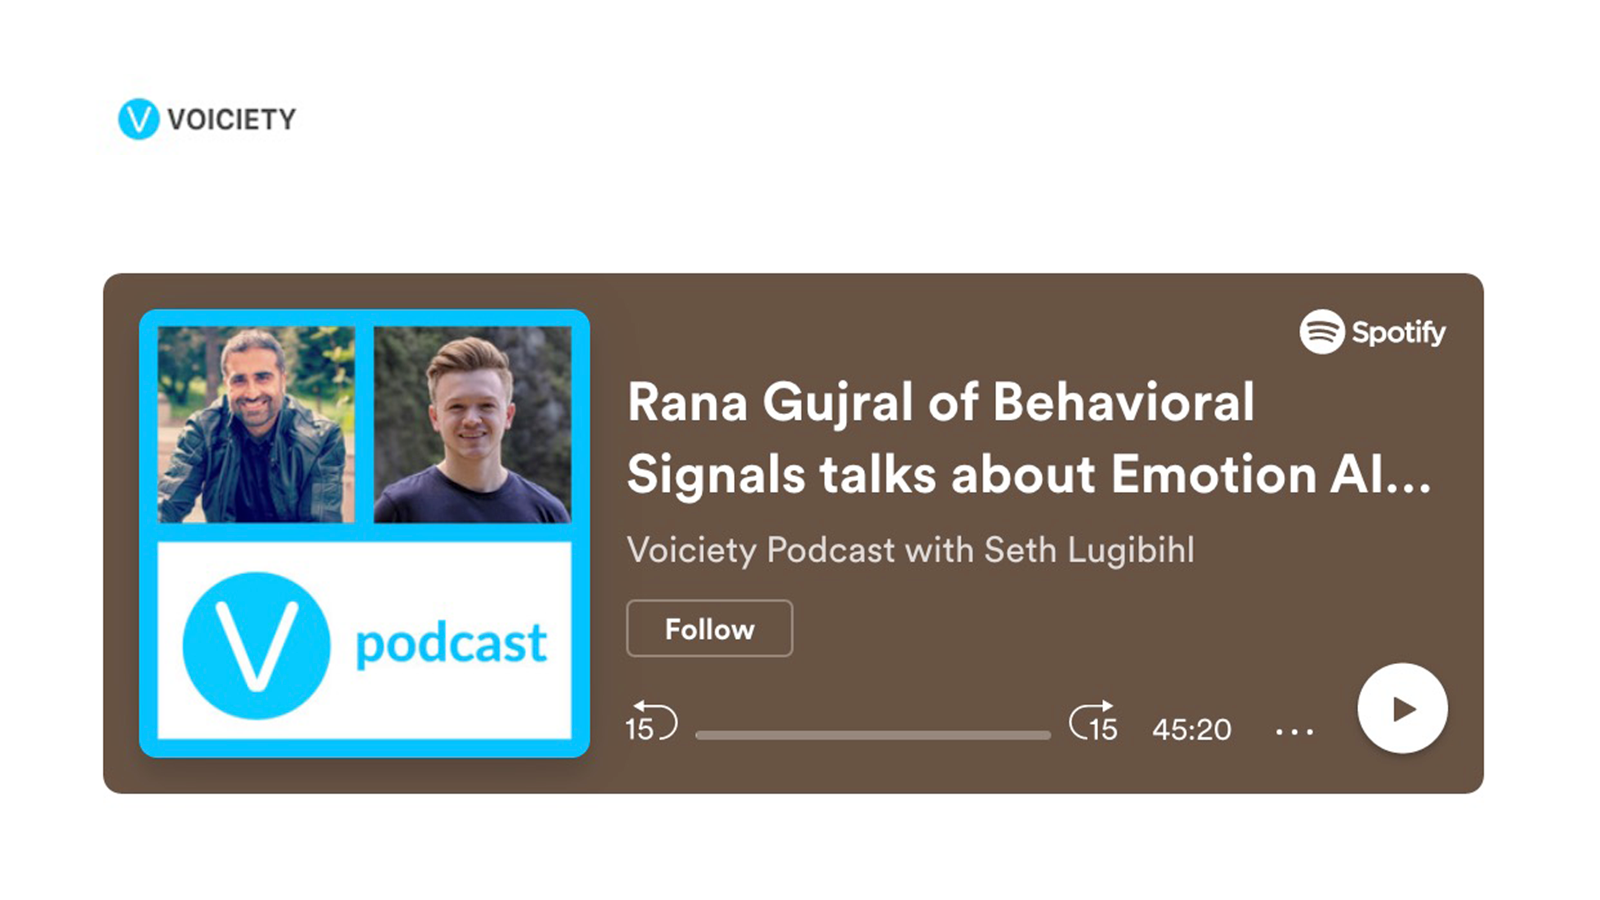 Voice Insights - Rana Gujral on Voiciety podcast